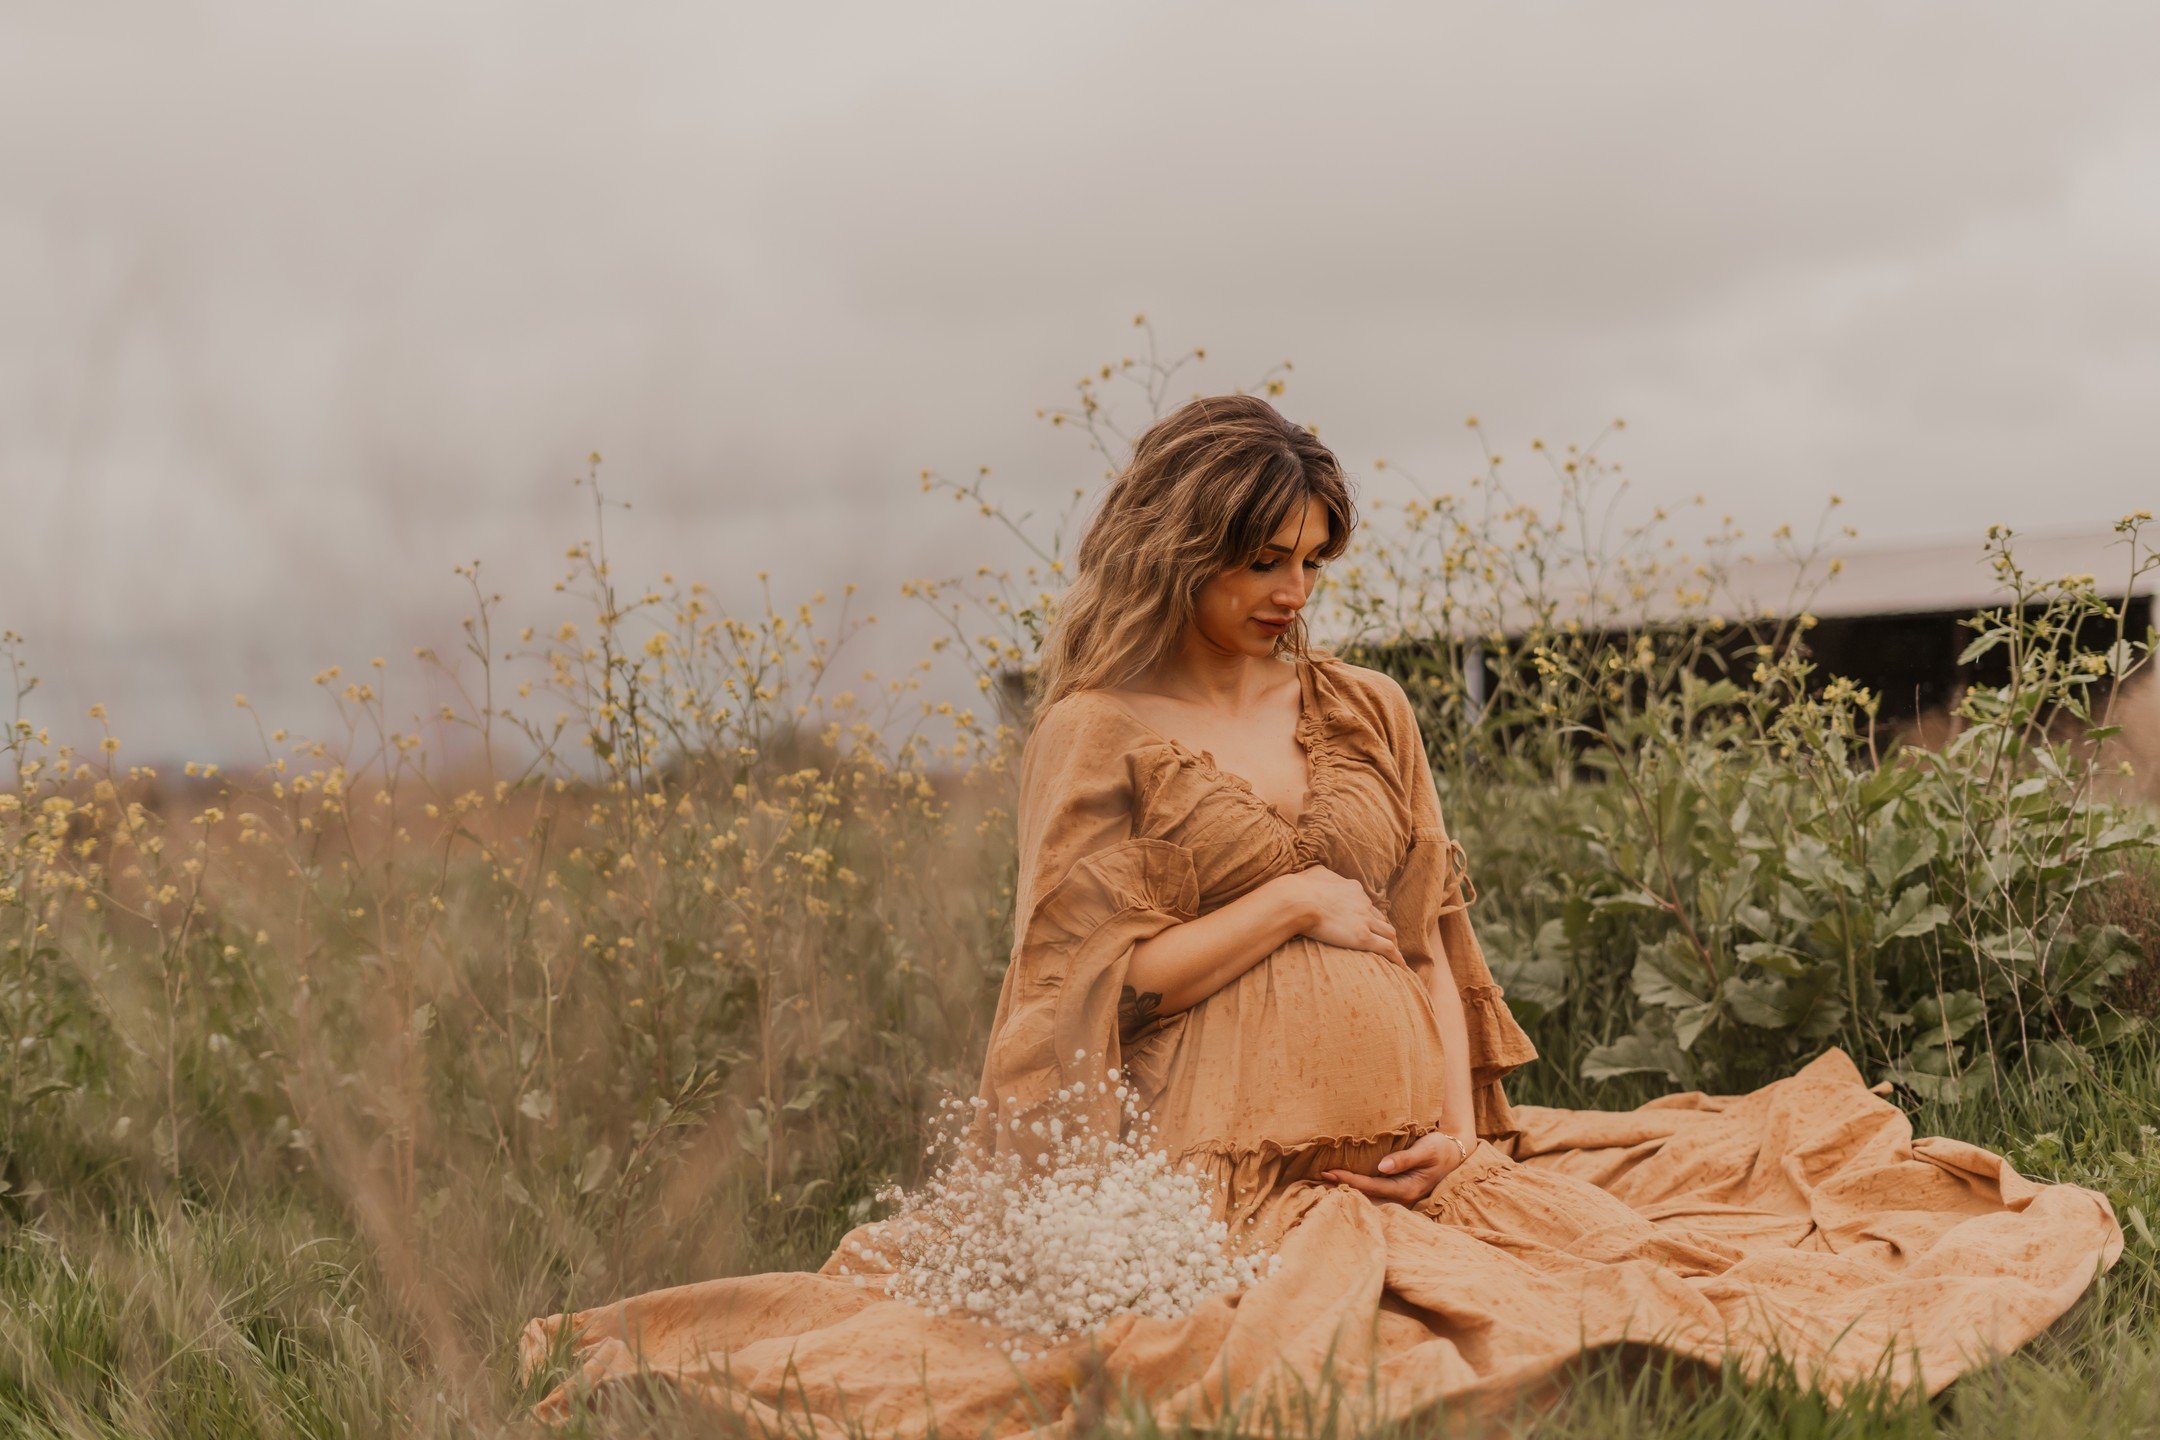 Dear Jesus, please bring me all the maternity sessions, thanks &amp; amen. @haileejordanboyd over here making it look easy!!